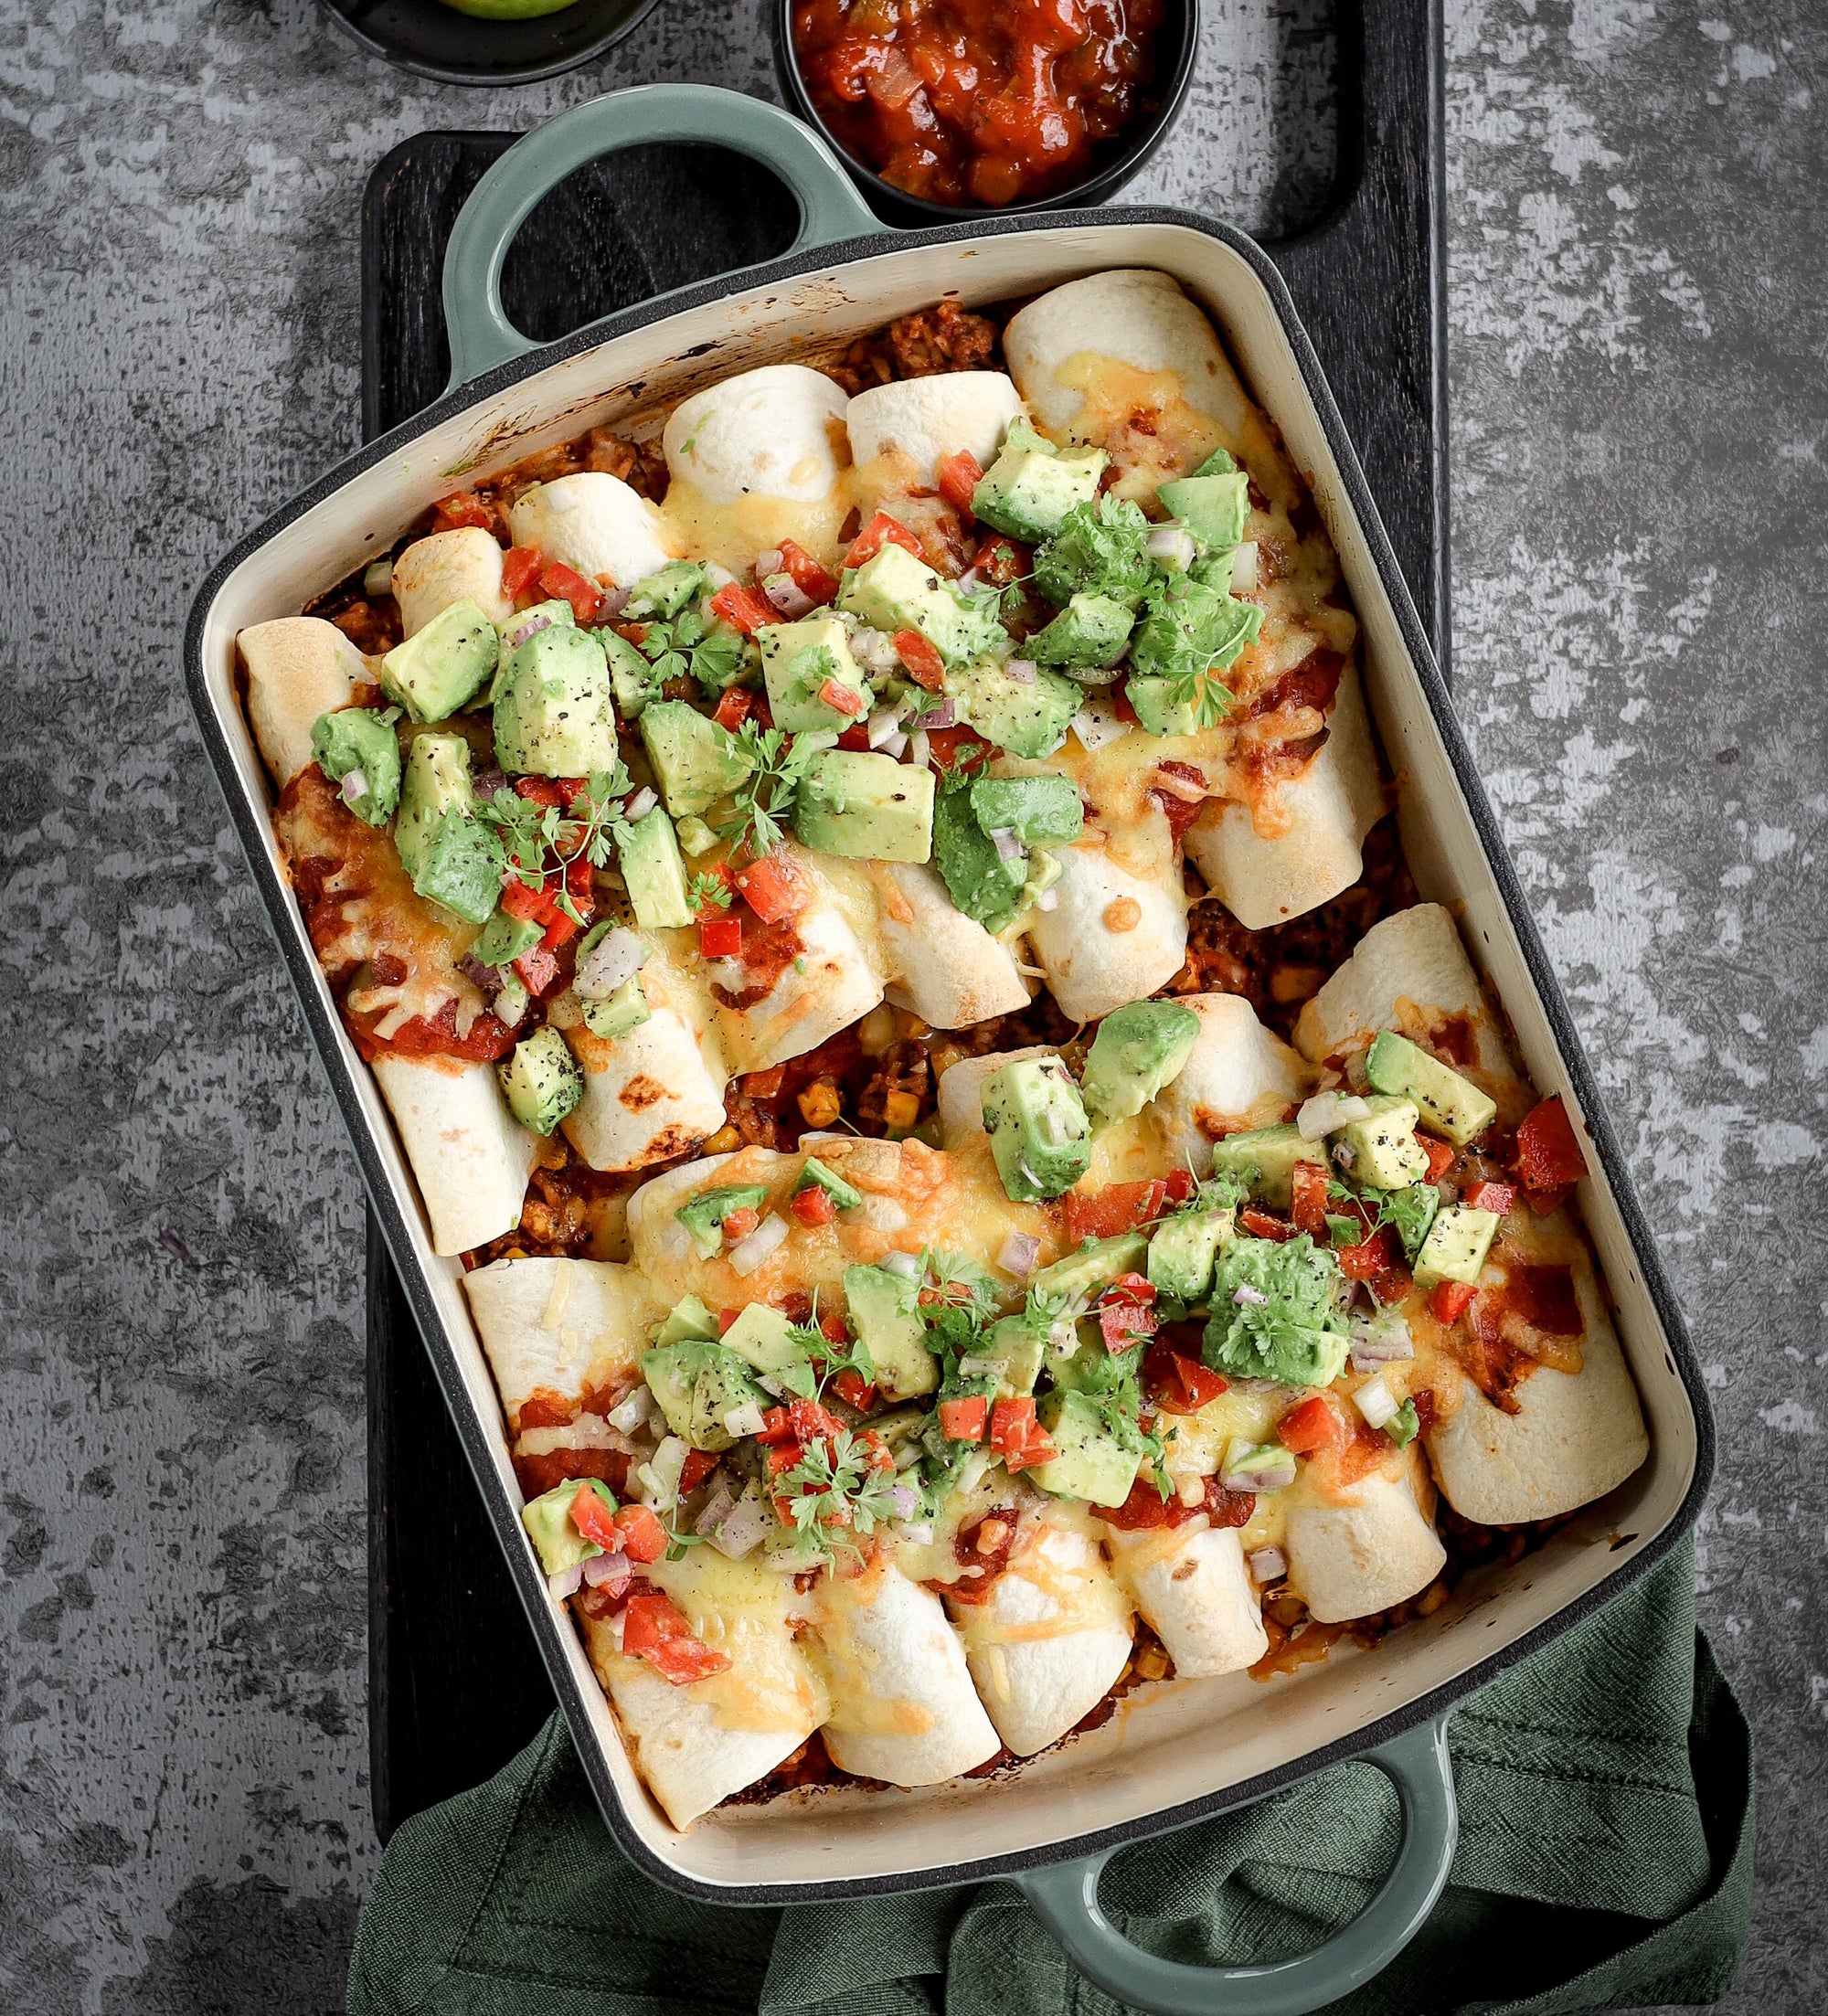 The Ultimate Meal Box - Cheesy Beef Enchiladas